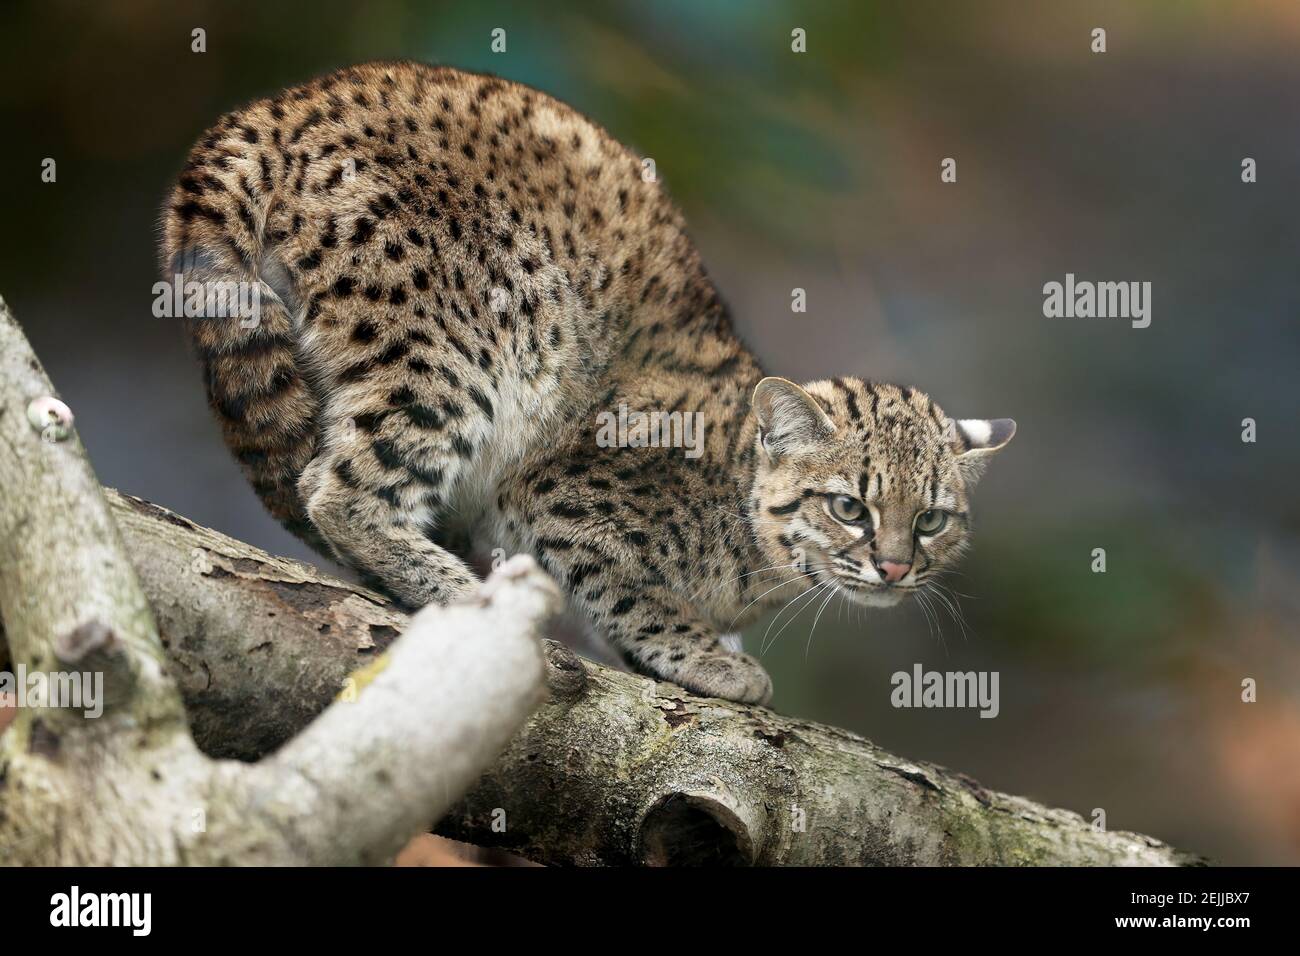 Geoffroy's cat, Leopardus geoffroyi, a wild cat native to South America on a branch against abstract background. Threatening posture, ears down. Night Stock Photo